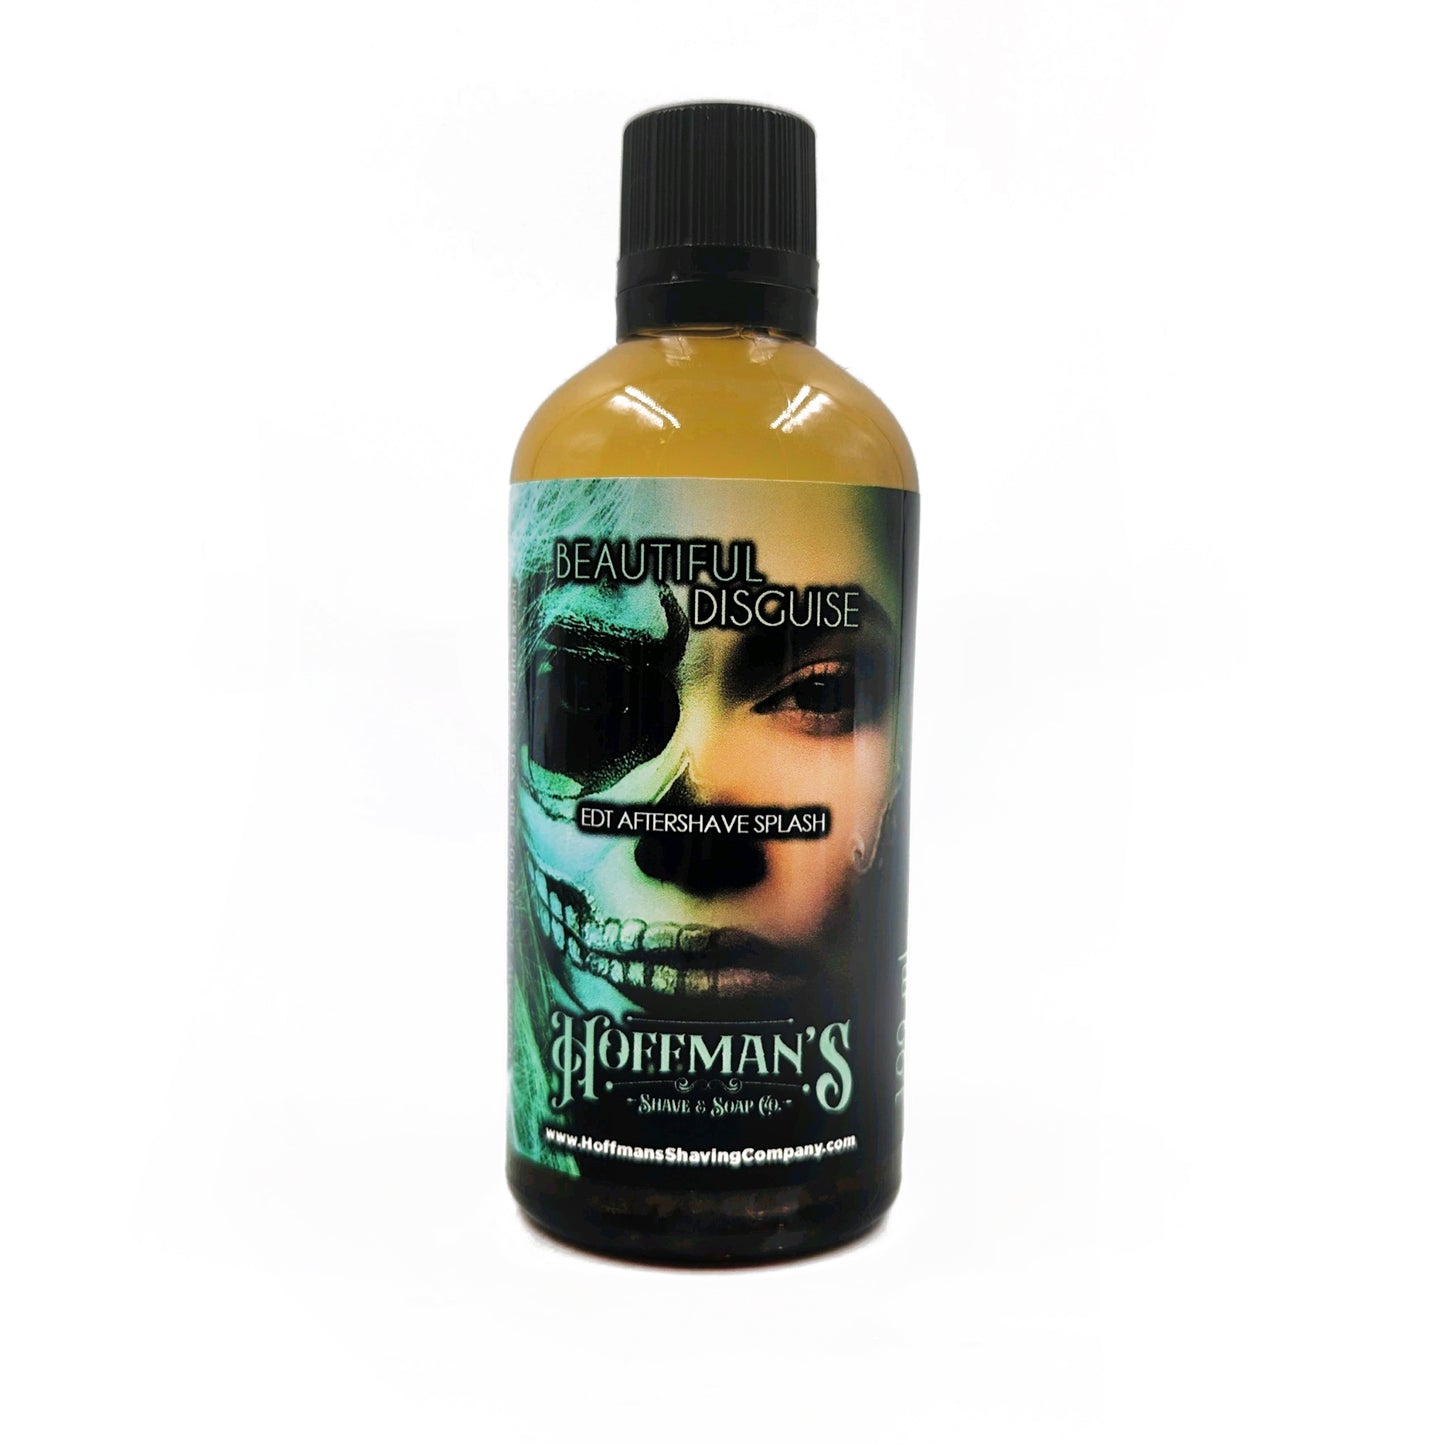 "Beautiful Disguise" EDT Aftershave Splash 100ml